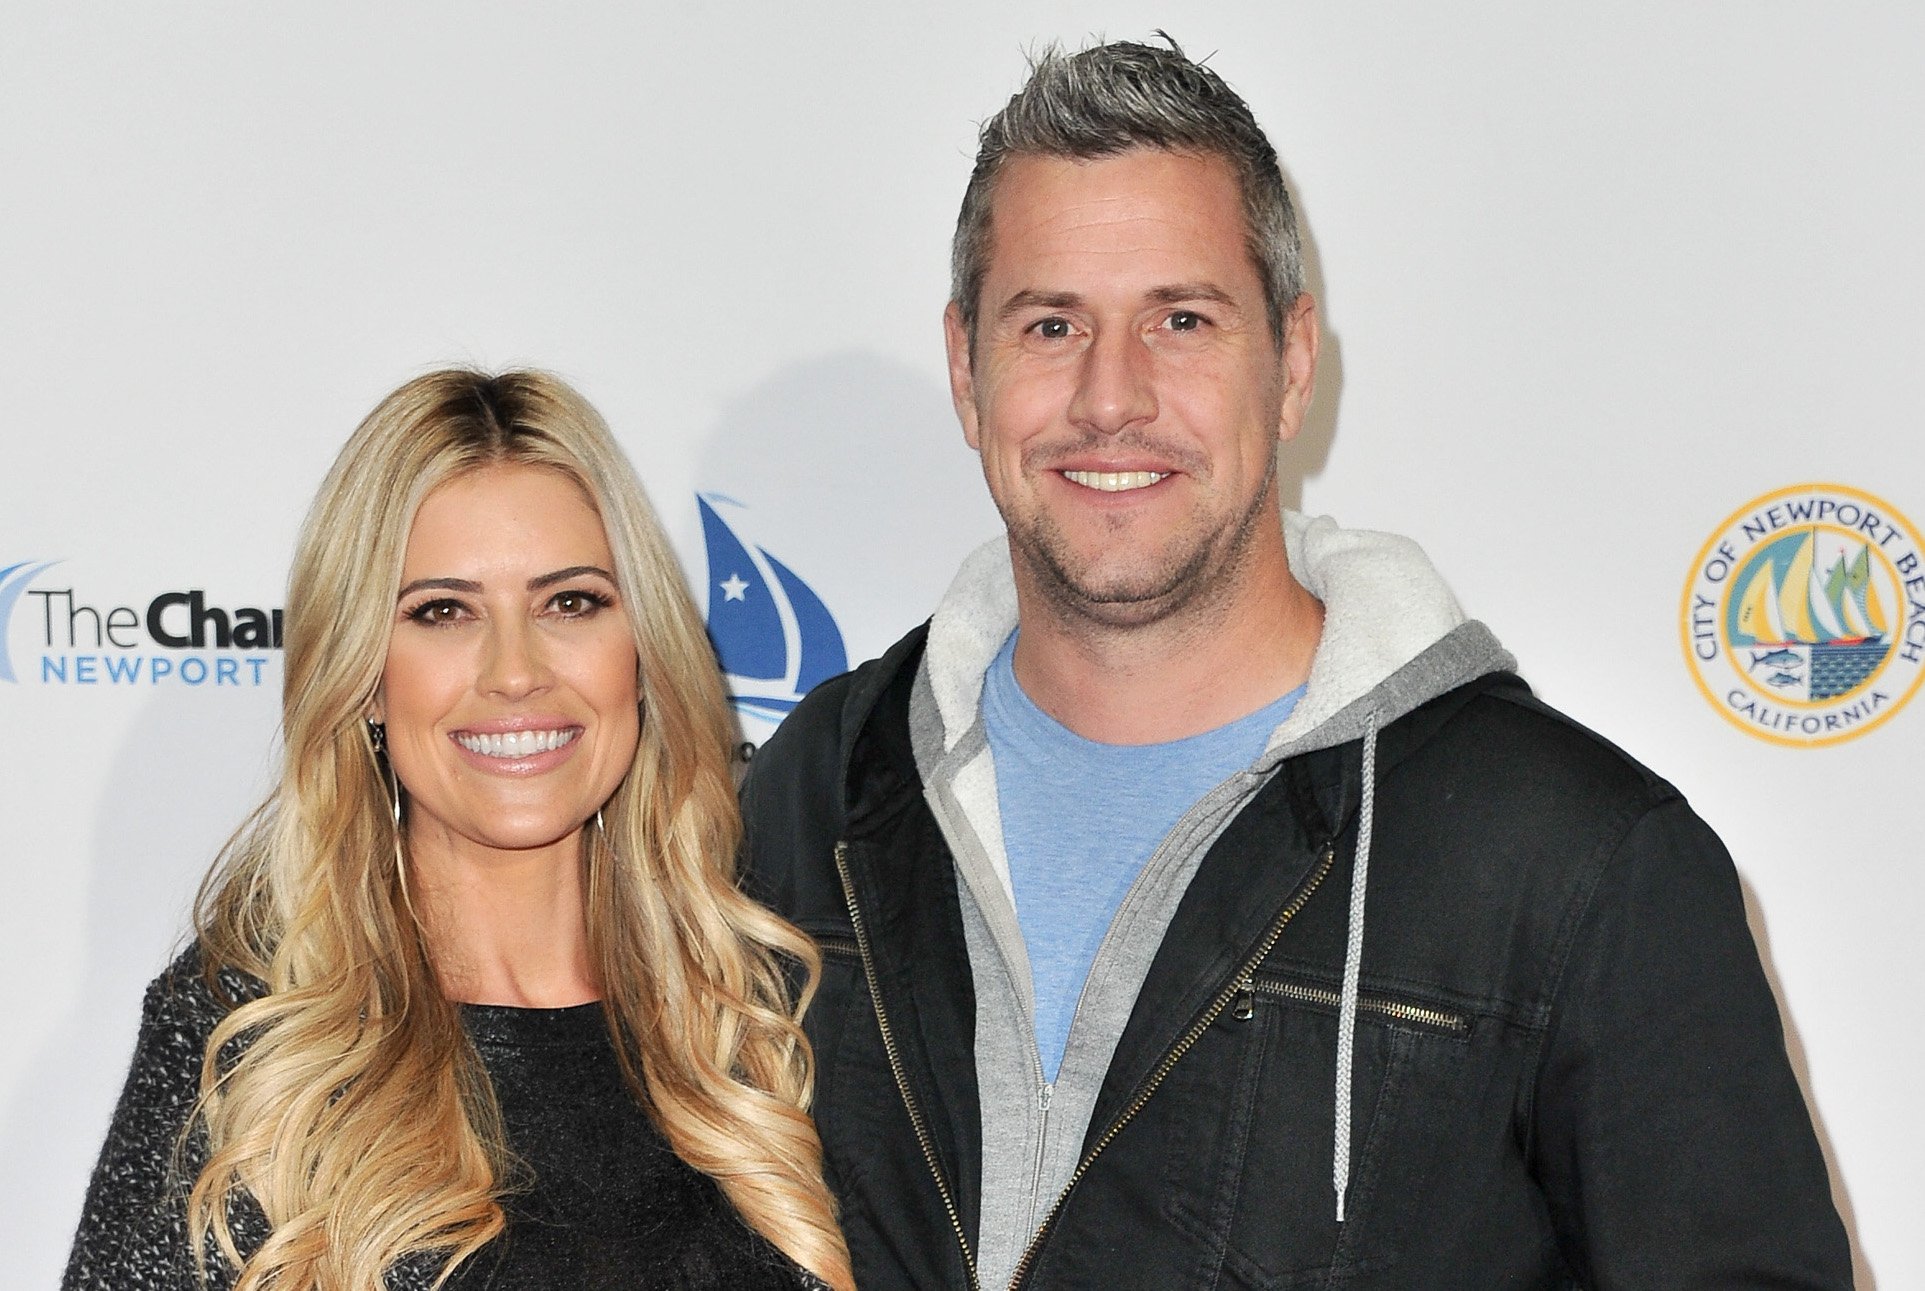 Ant Anstead Files For Full Custody Of 2-Year-Old Son He Shares With HGTV Star Christina Hall Claims Neglectful Behavior